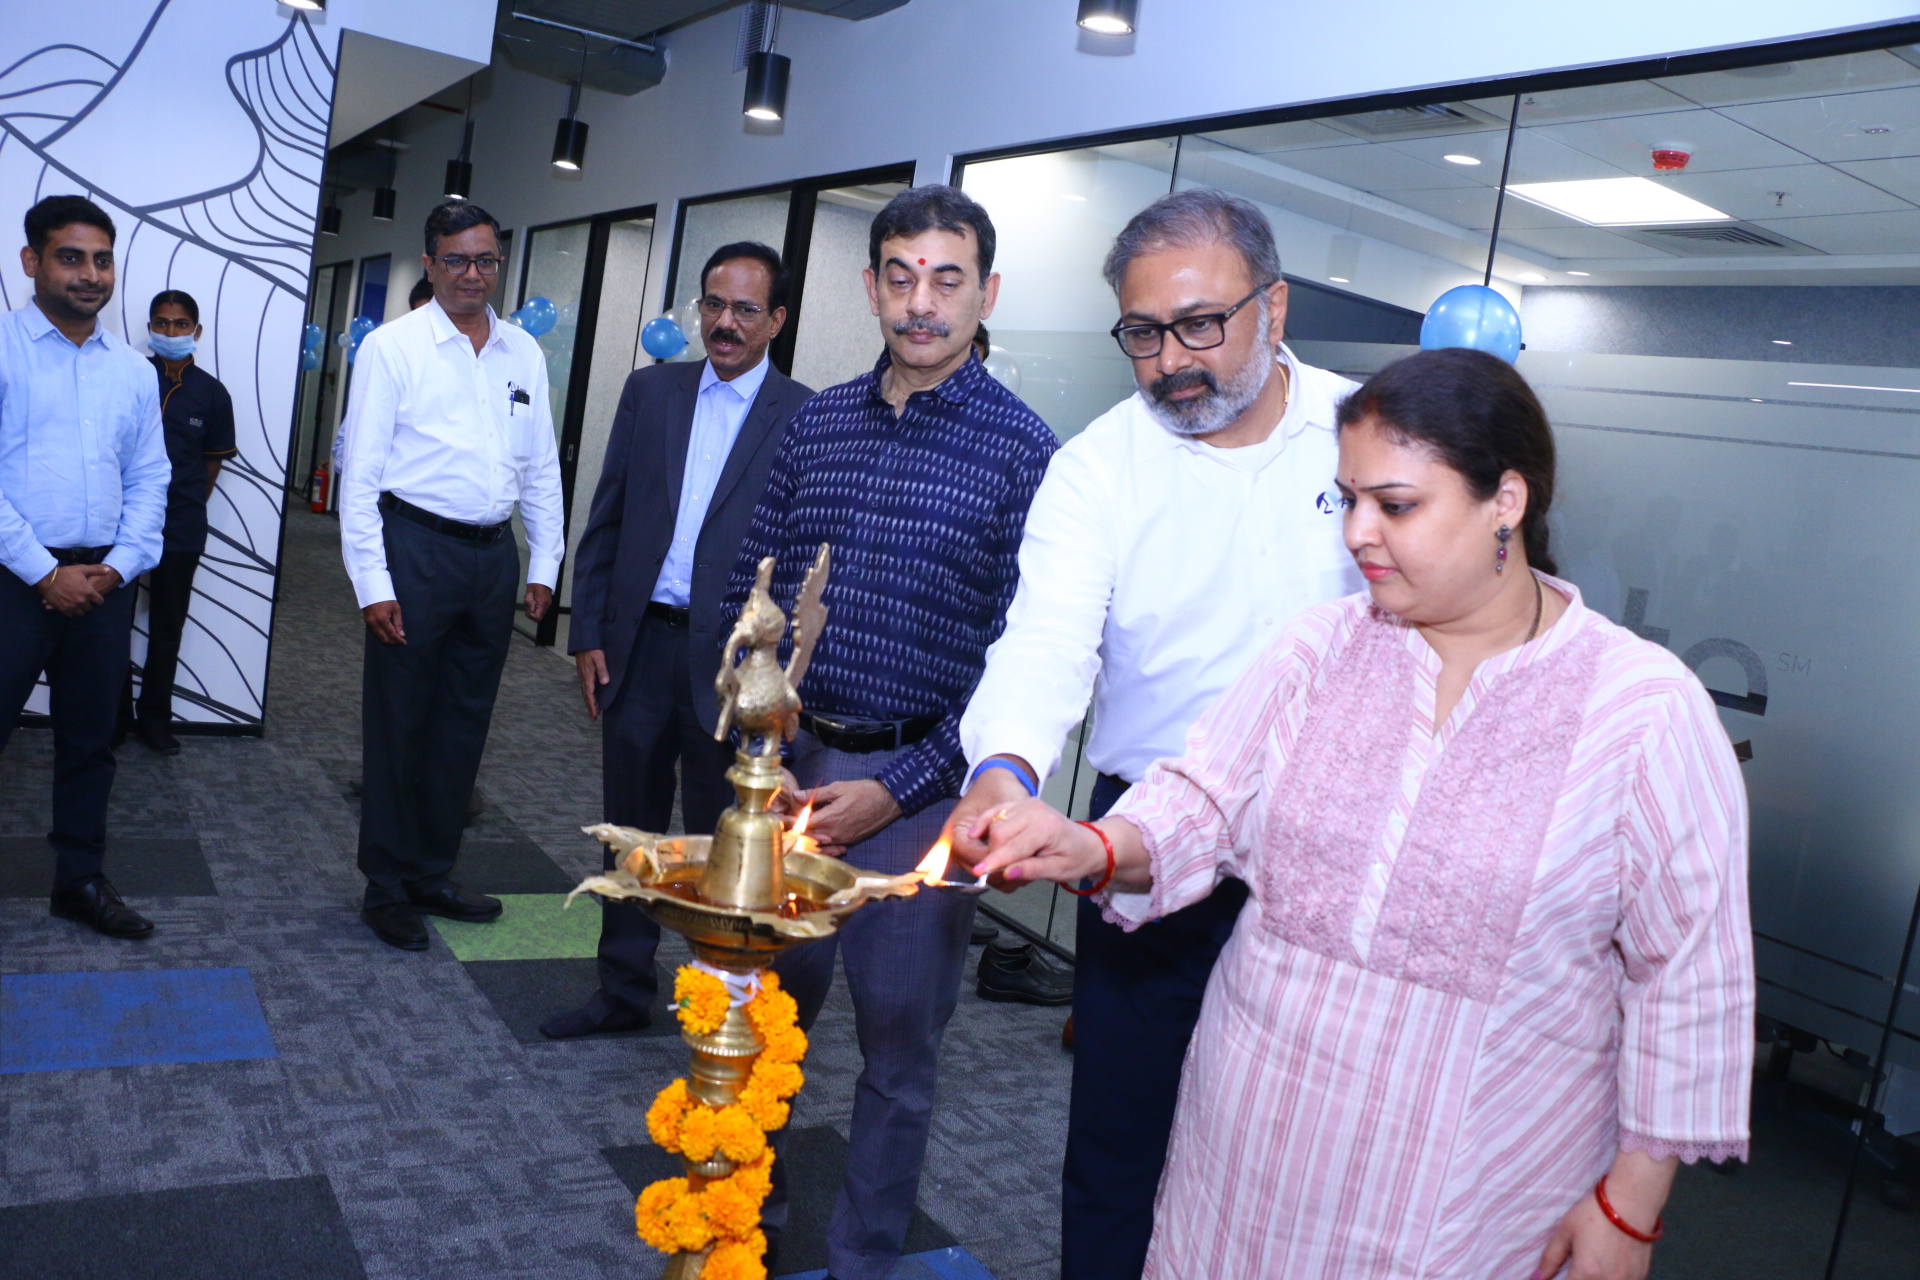 Arete Expands Its Global Cyber Response Capabilities With New Hyderabad Facility.